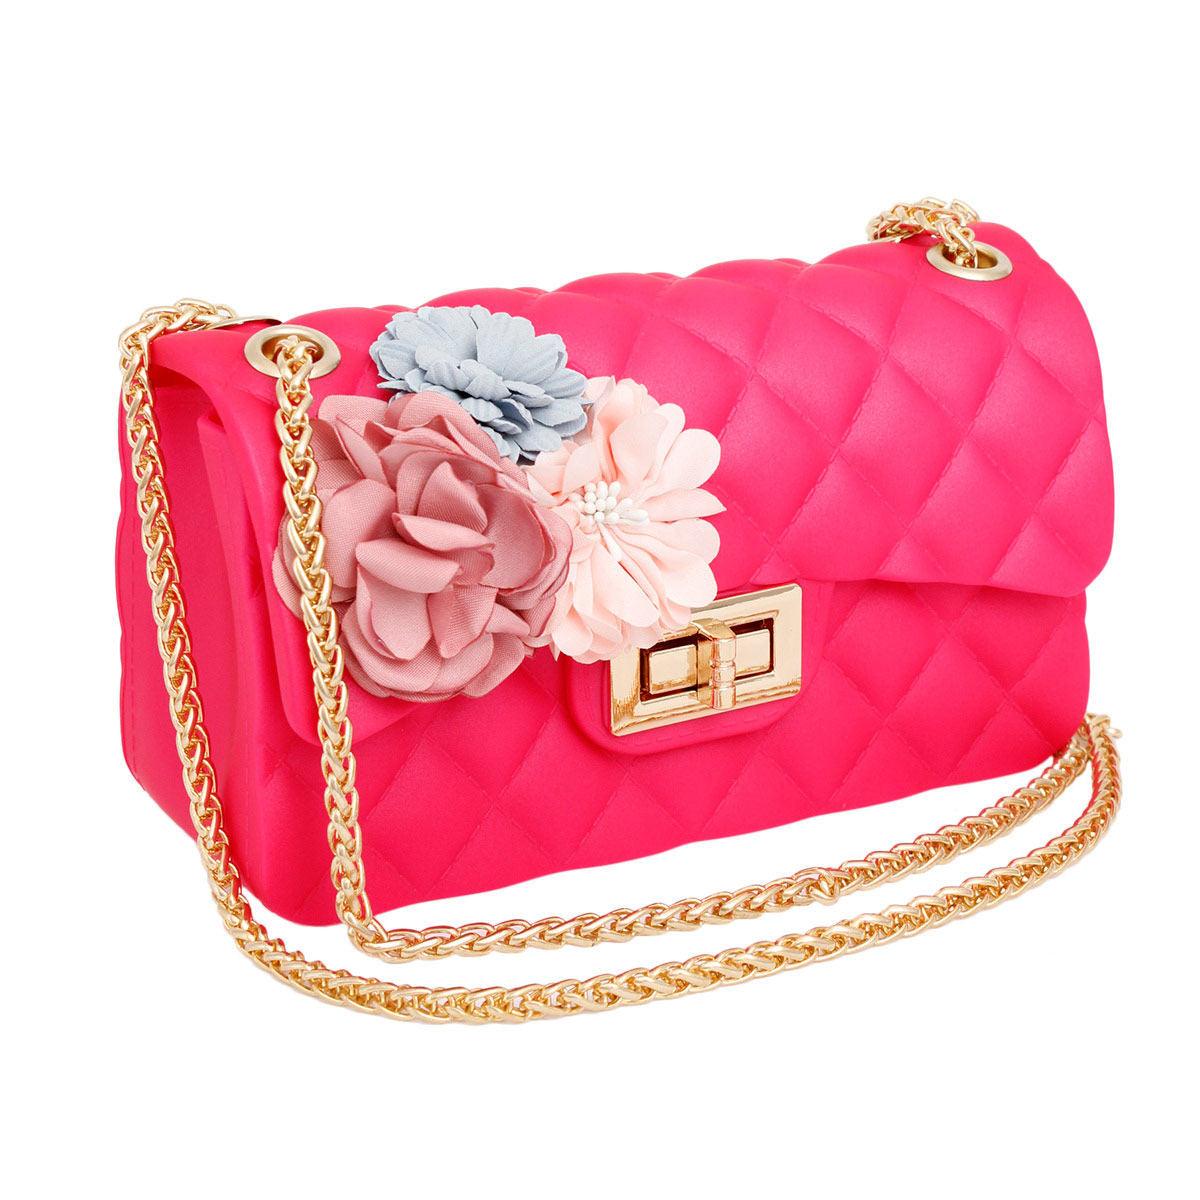 Make a Statement with a Stunning Fuchsia Quilted Jelly Crossbody Mini Bag